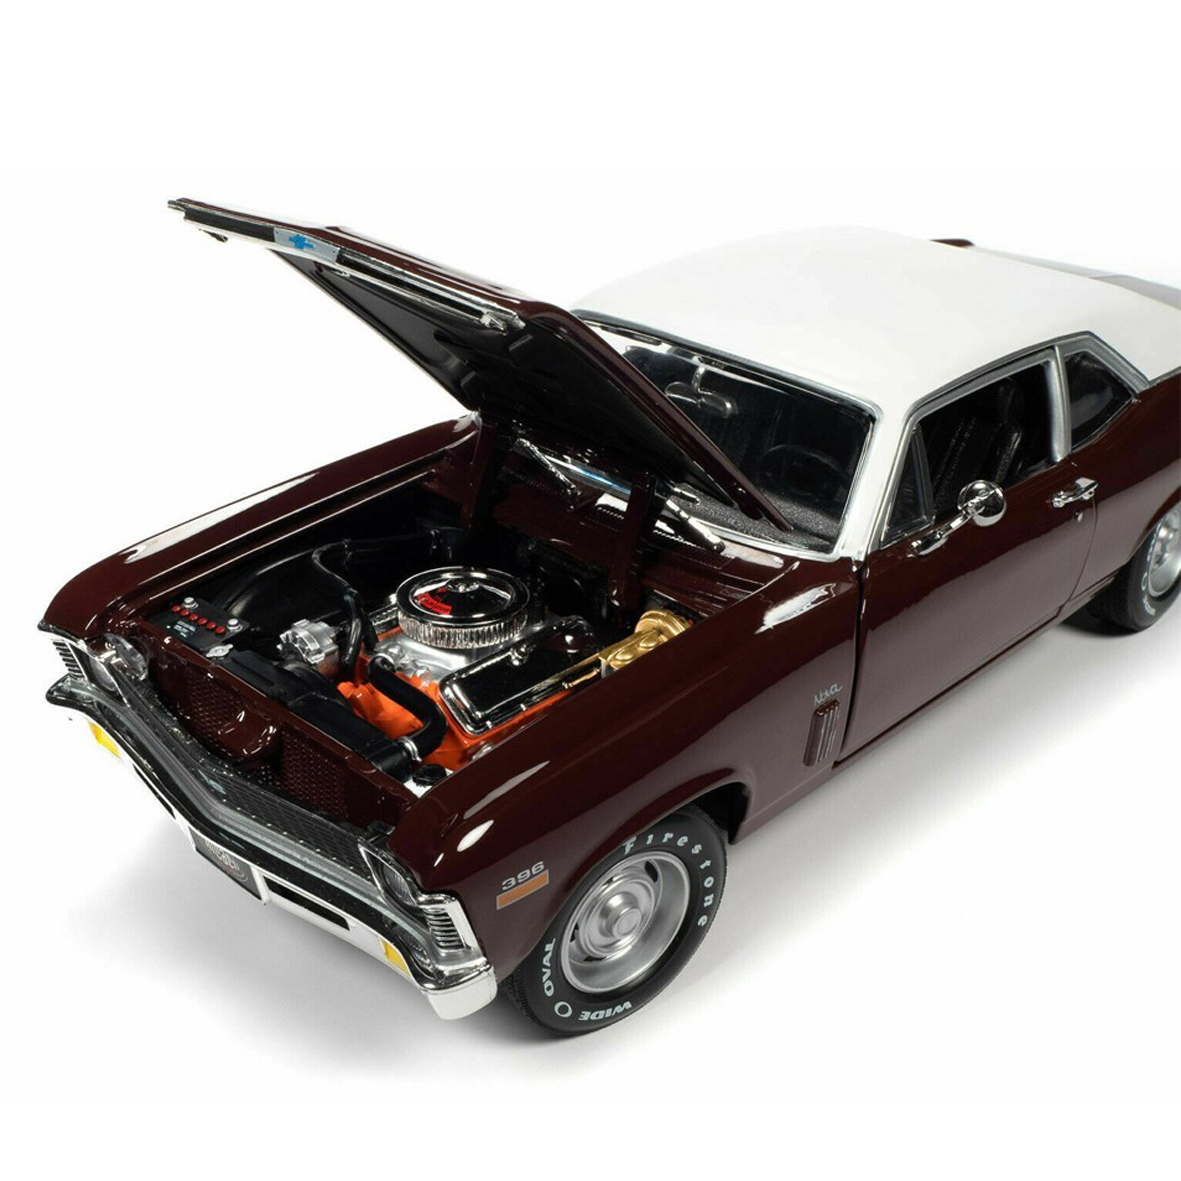 American Muscle,1:18 Scale 1970 Chevy Nova SS 396 MCACN Auto World American Muscle